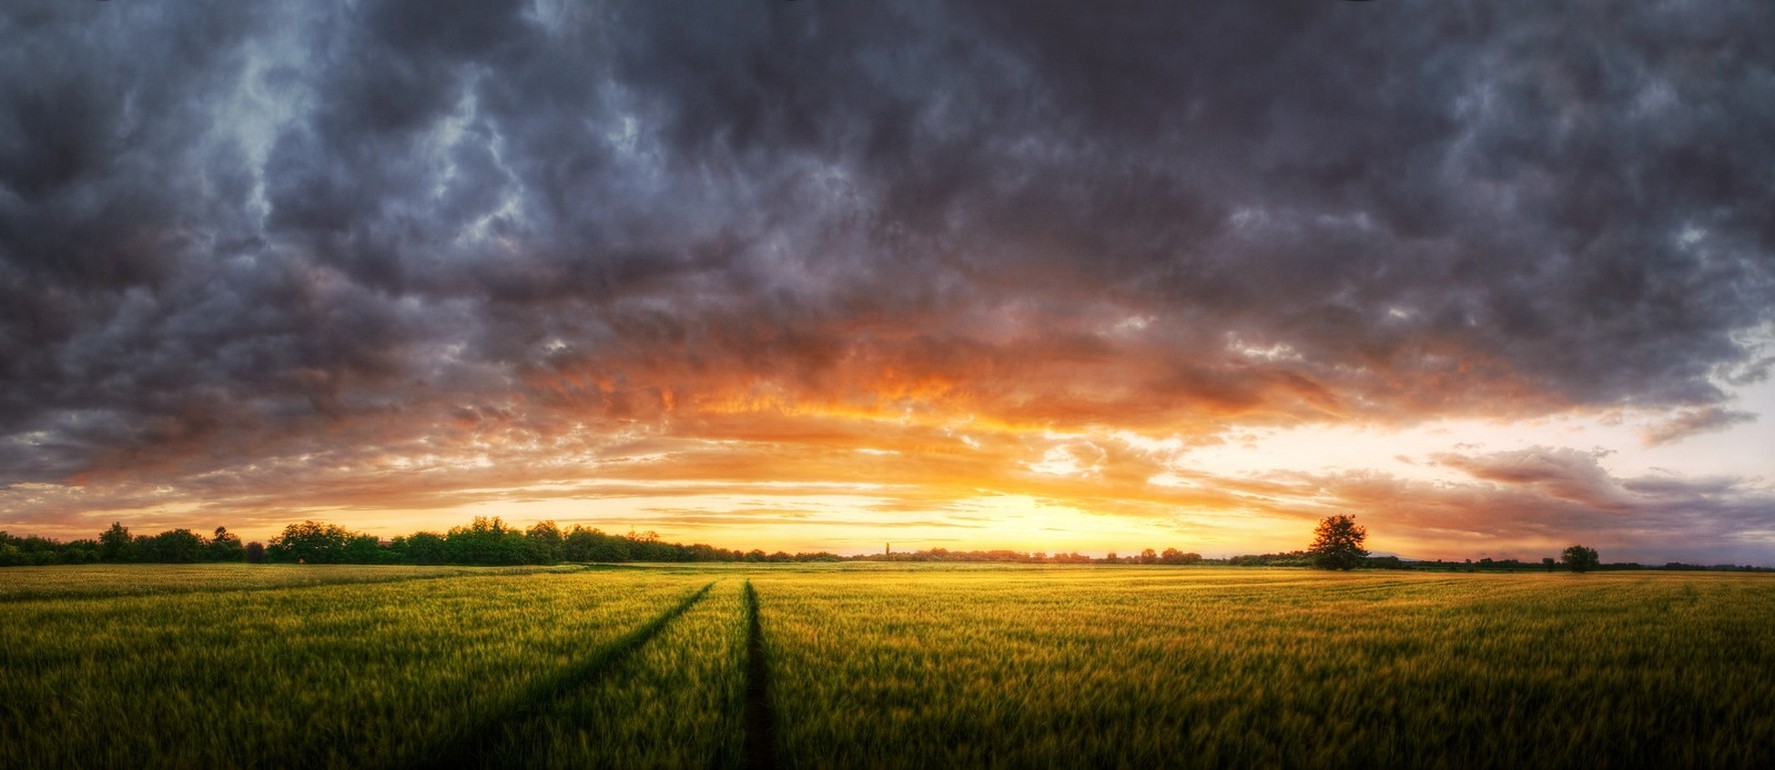 panoramas, Sunset, Nature, Sky, Clouds, Field, Landscape, Trees, Colorful Wallpaper